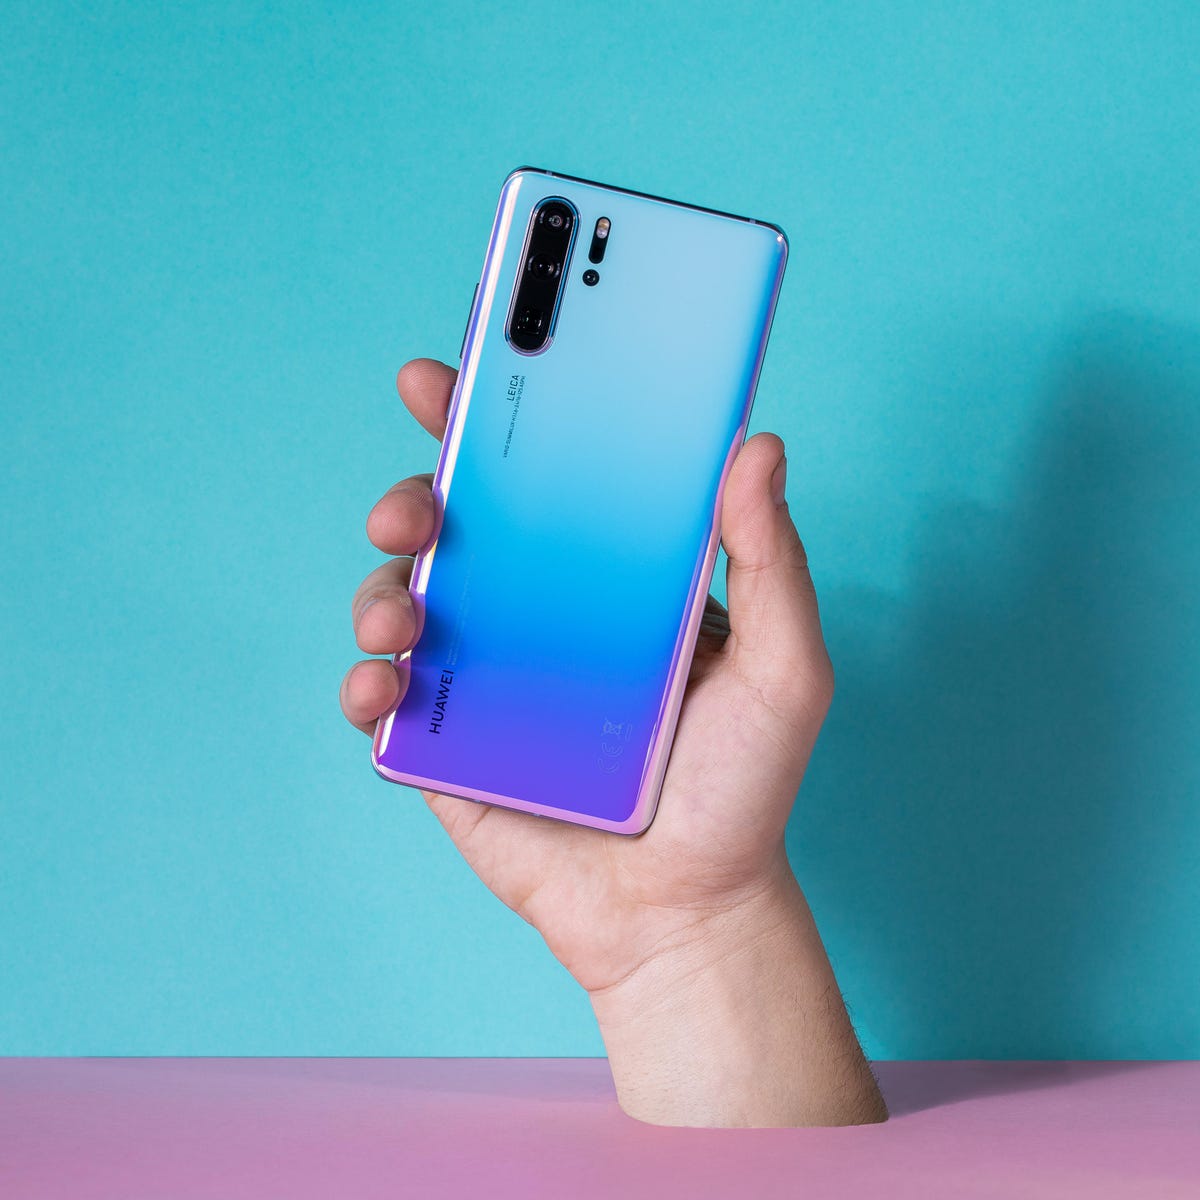 Huawei P30 Pro review: The absolute best camera on any phone - CNET